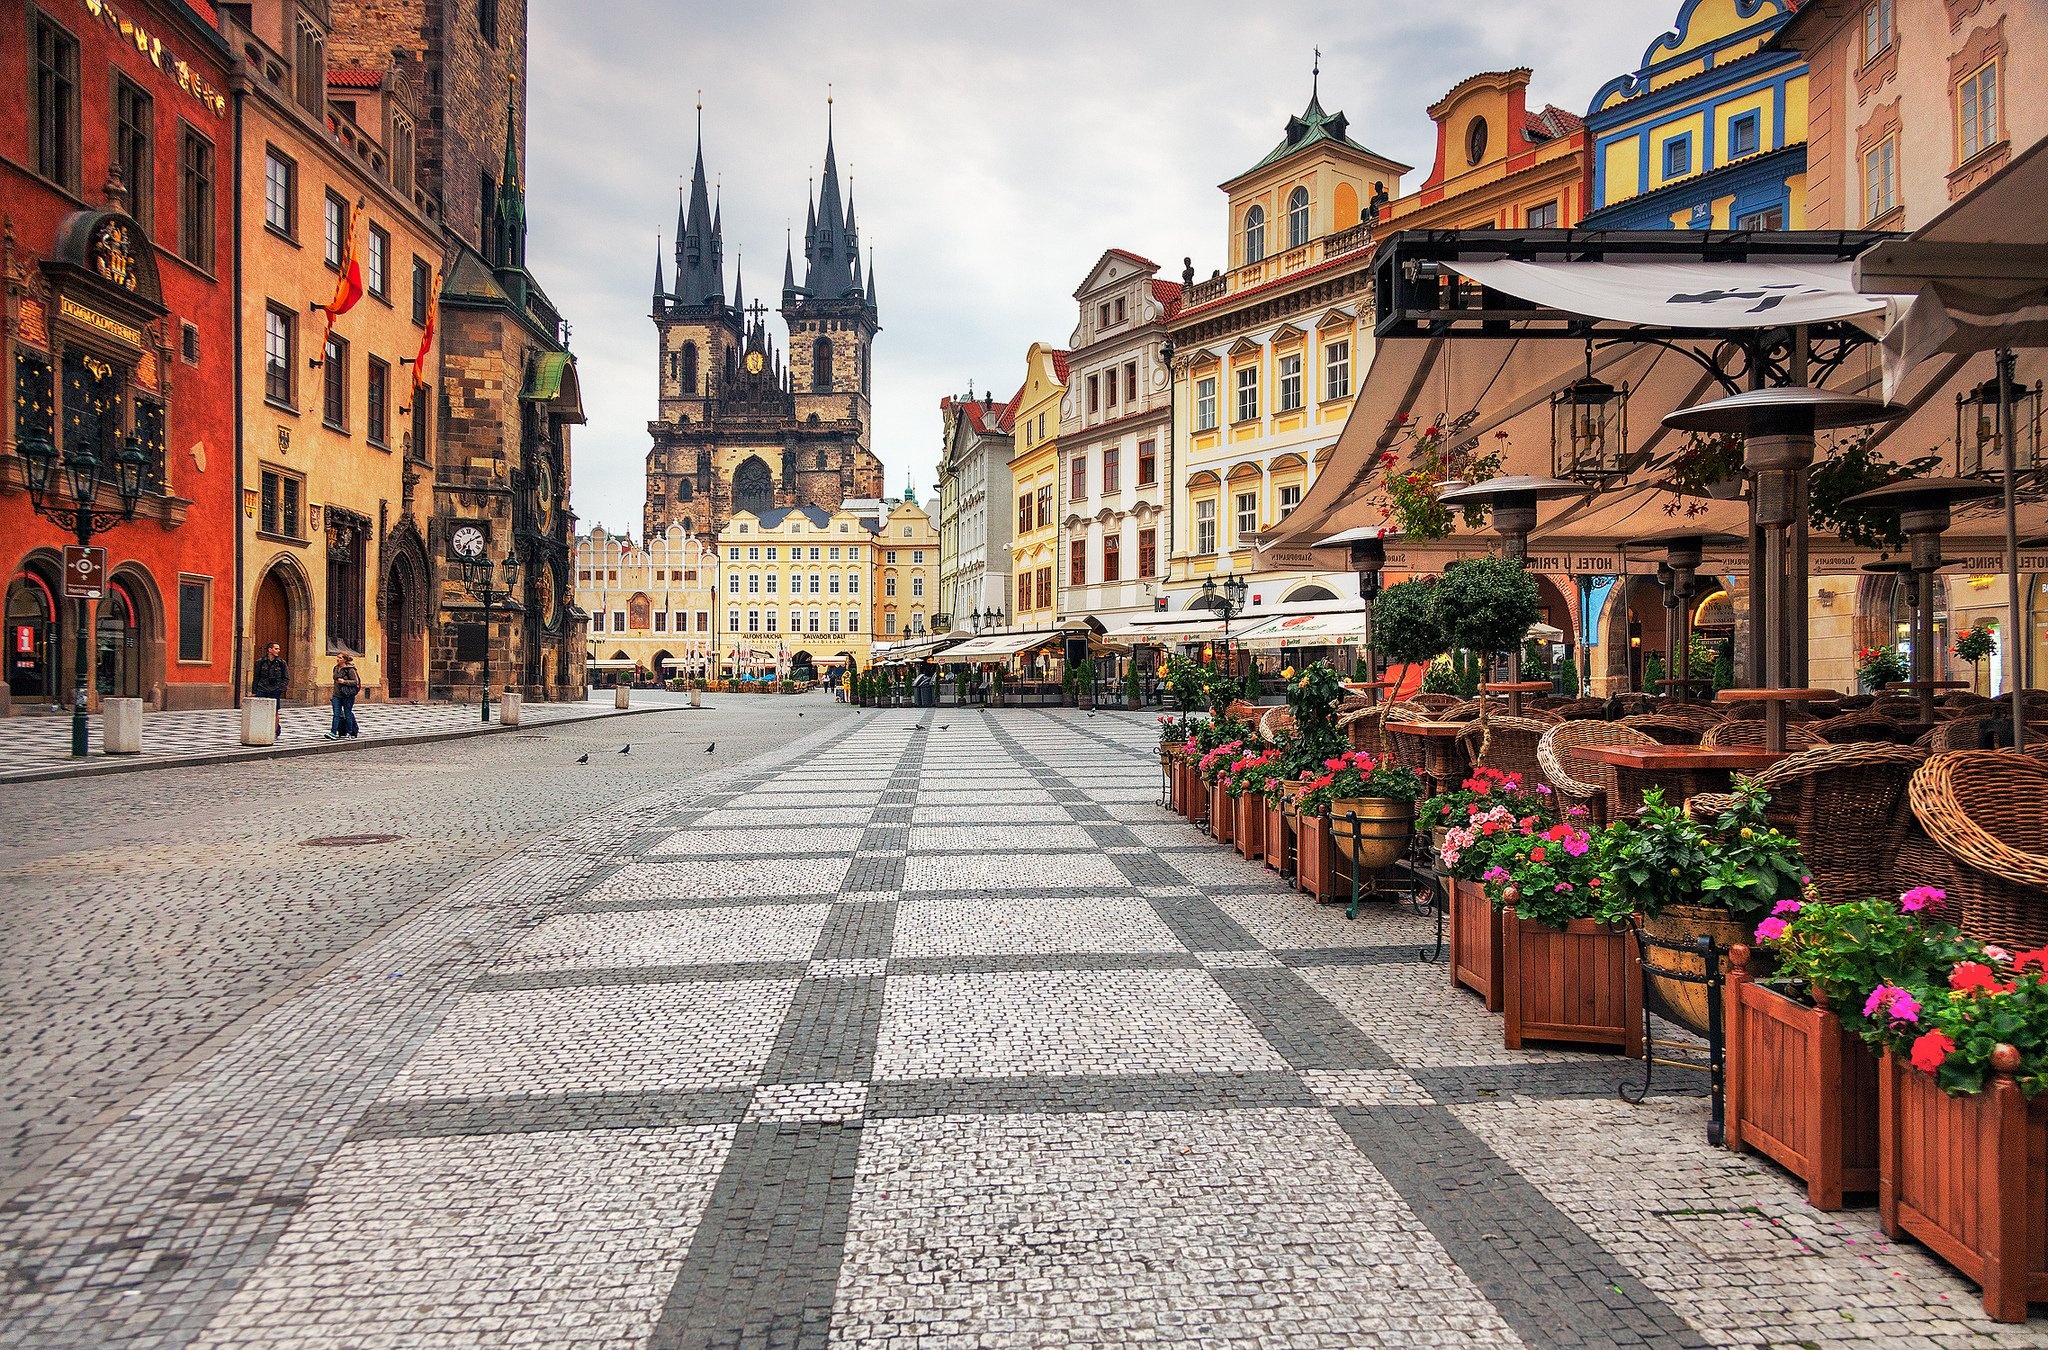 Czechia (Czech Republic): Old Town Square, A historic square in the Old Town quarter of Prague. 2050x1350 HD Wallpaper.